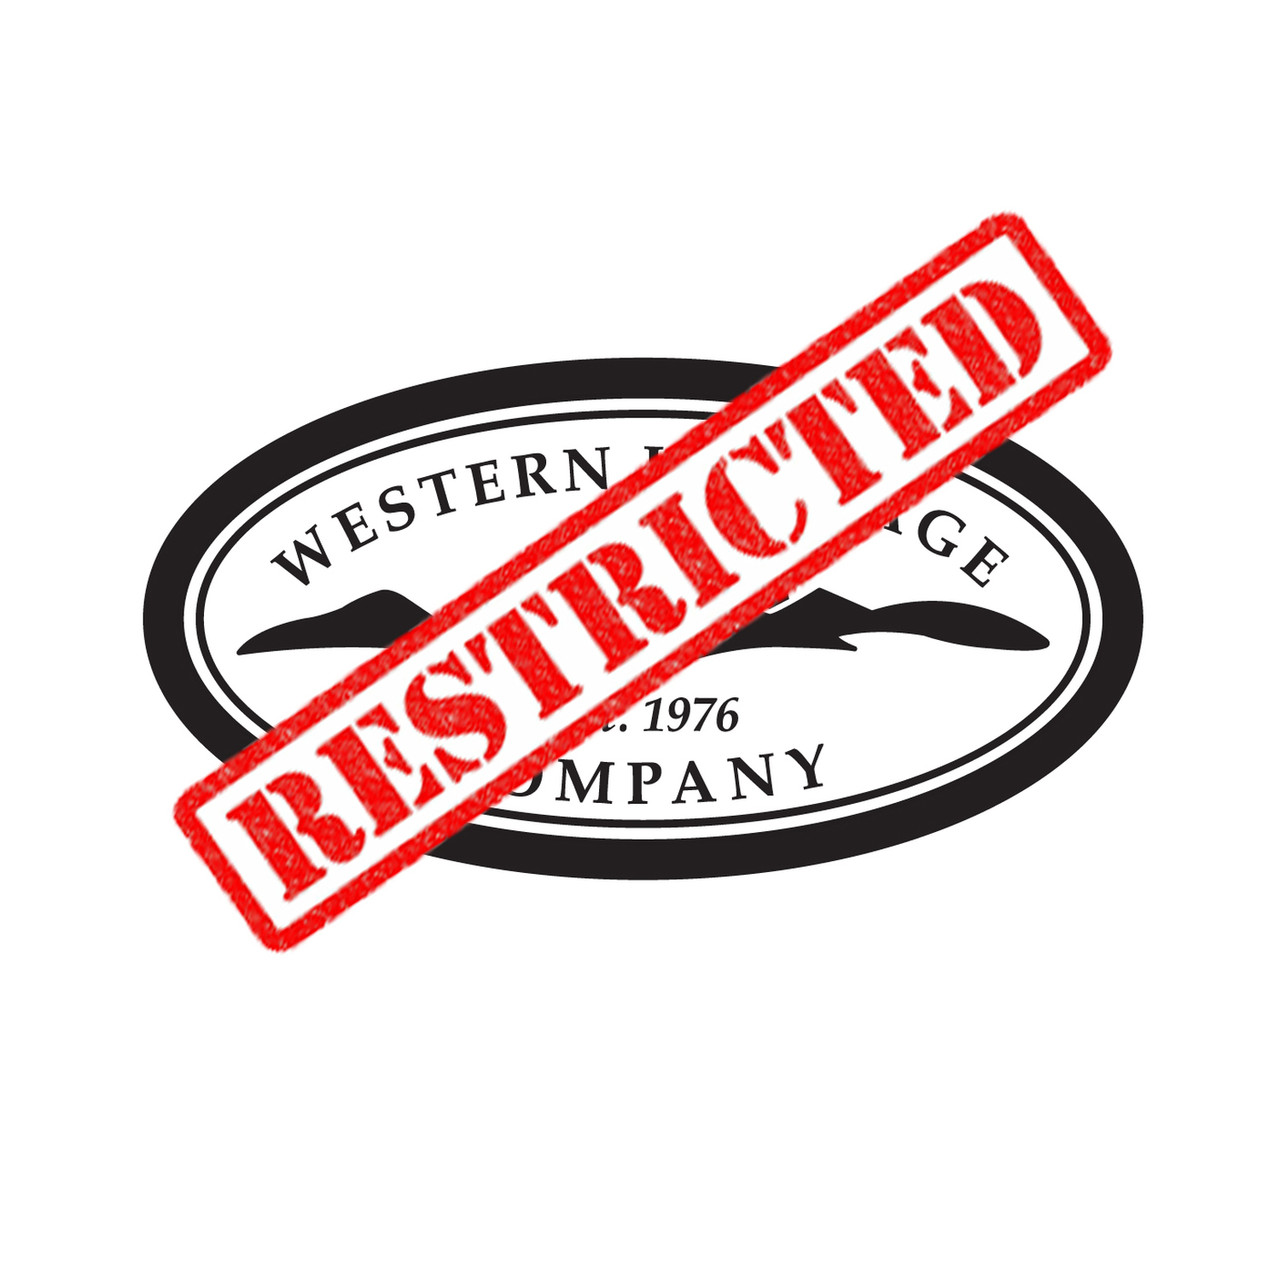 Whatcom Transportation Authority (RESTRICTED)